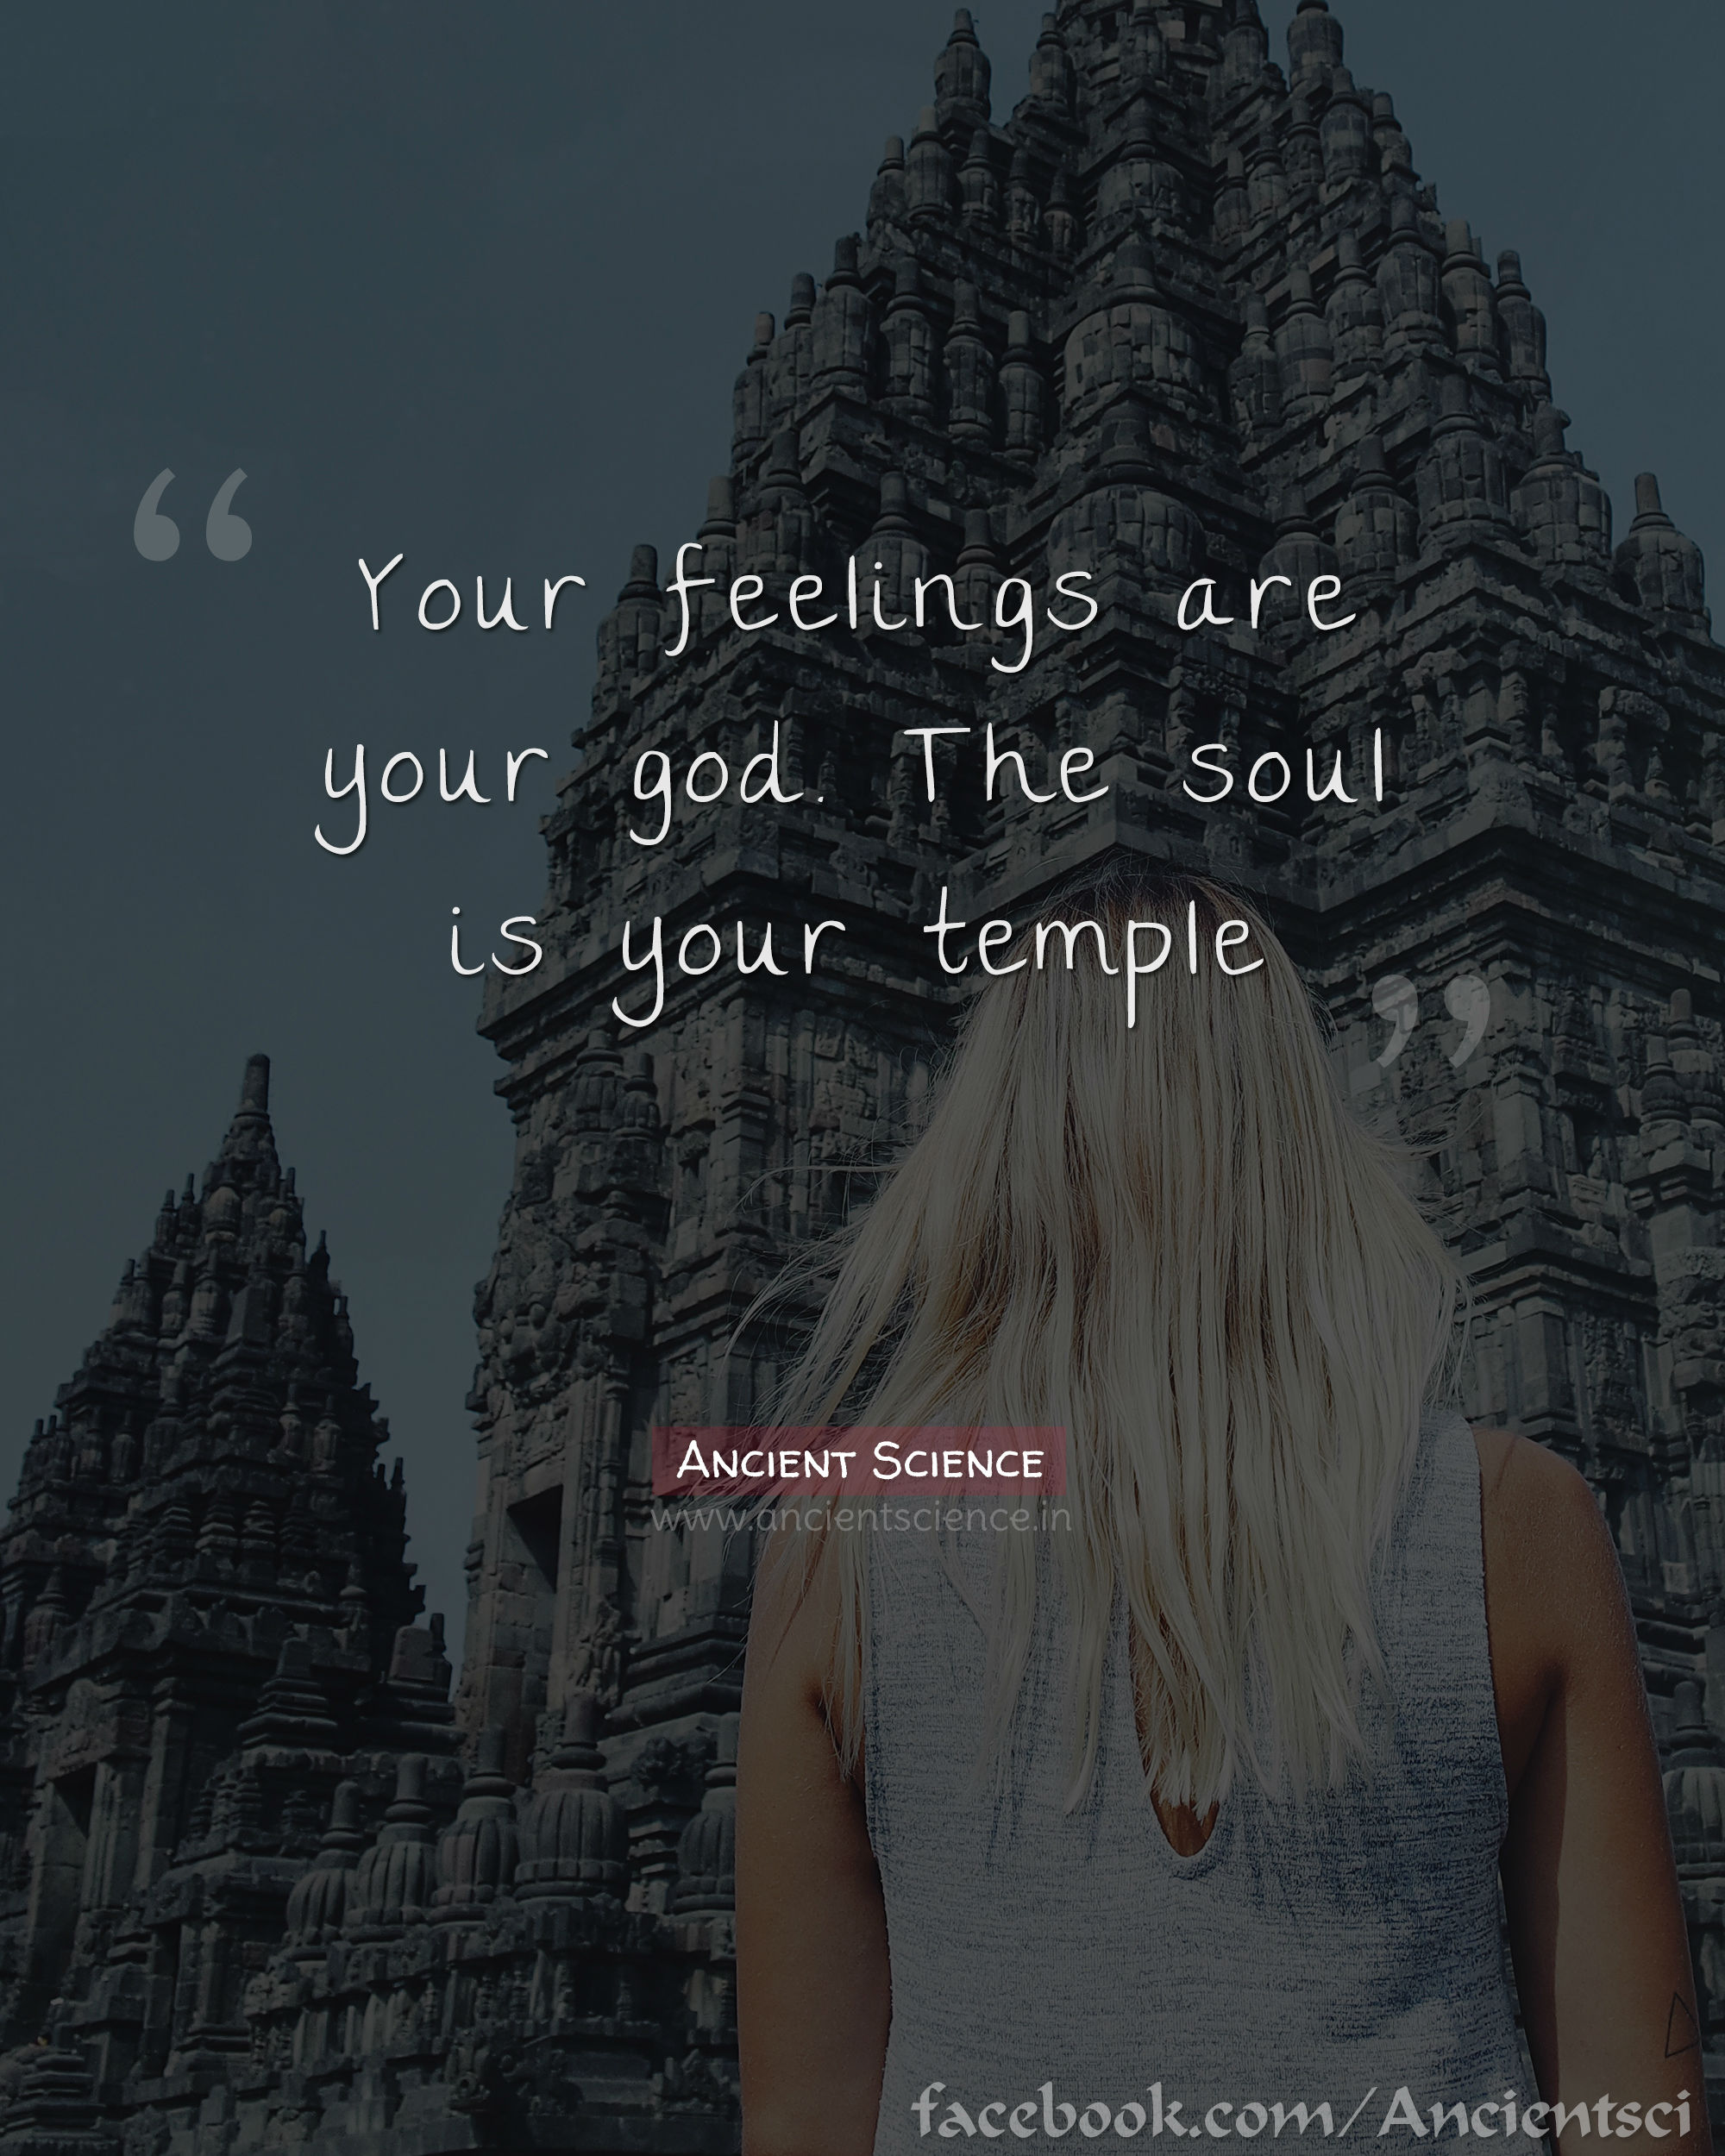 Your feelings are your god, The soul is your temple